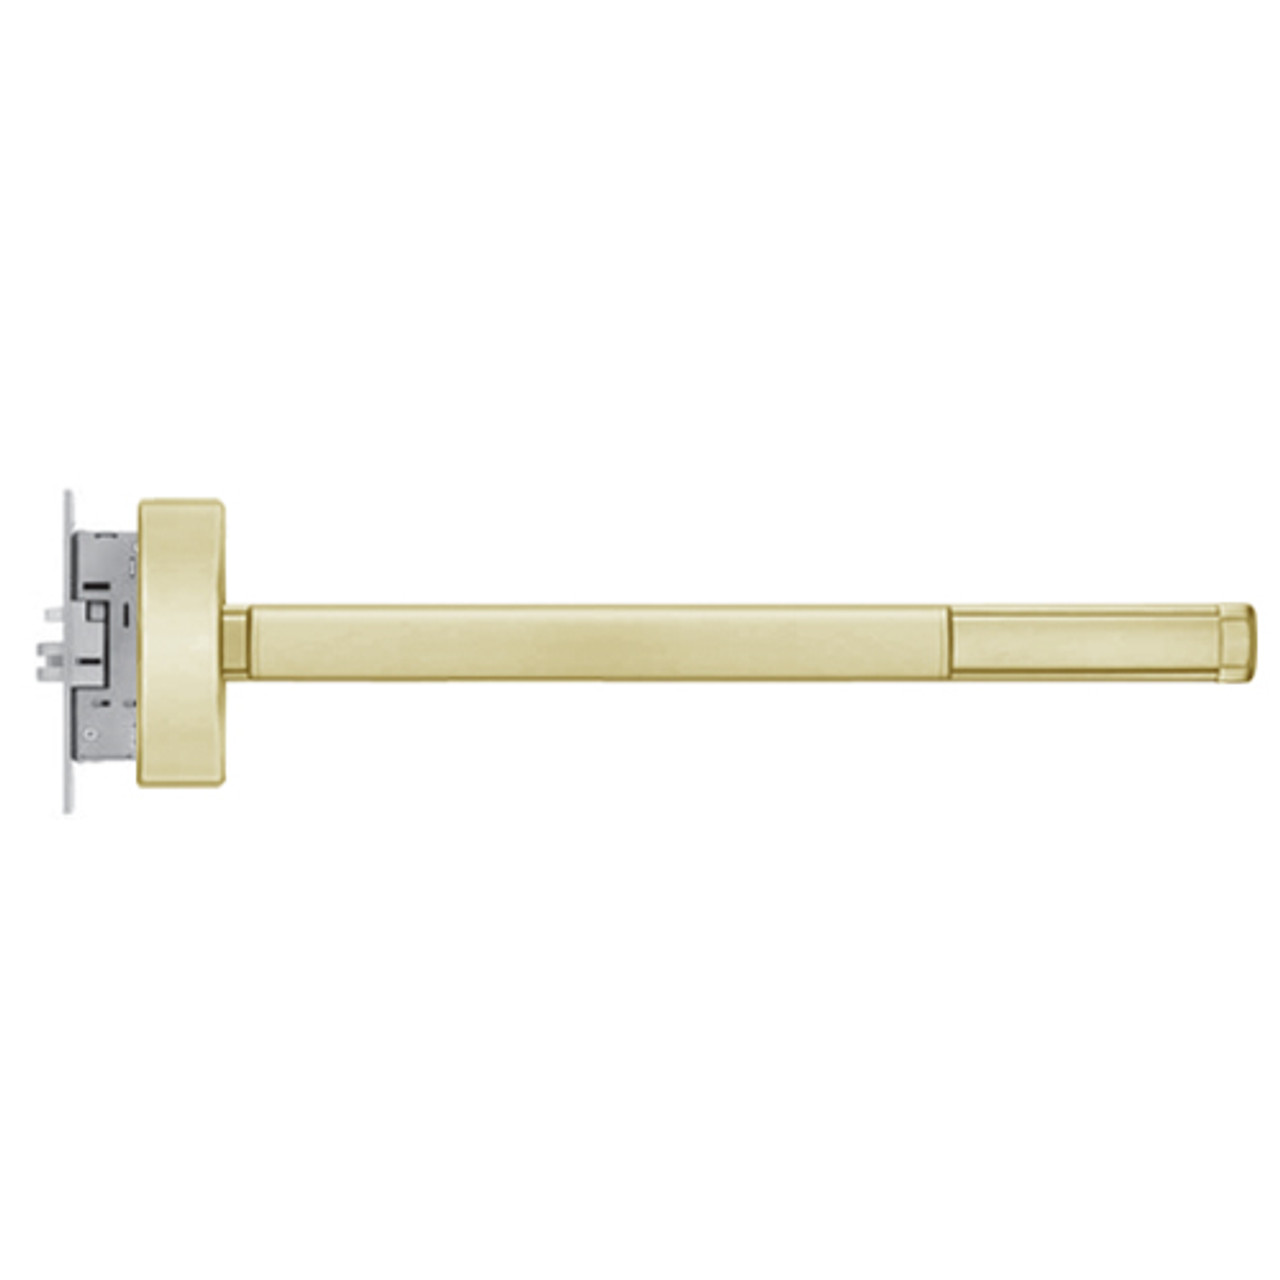 TS2305-LHR-606-48 PHI 2300 Series Apex Mortise Exit Device with Touchbar Monitoring Switch Prepped for Key Controls Thumb Piece in Satin Brass Finish